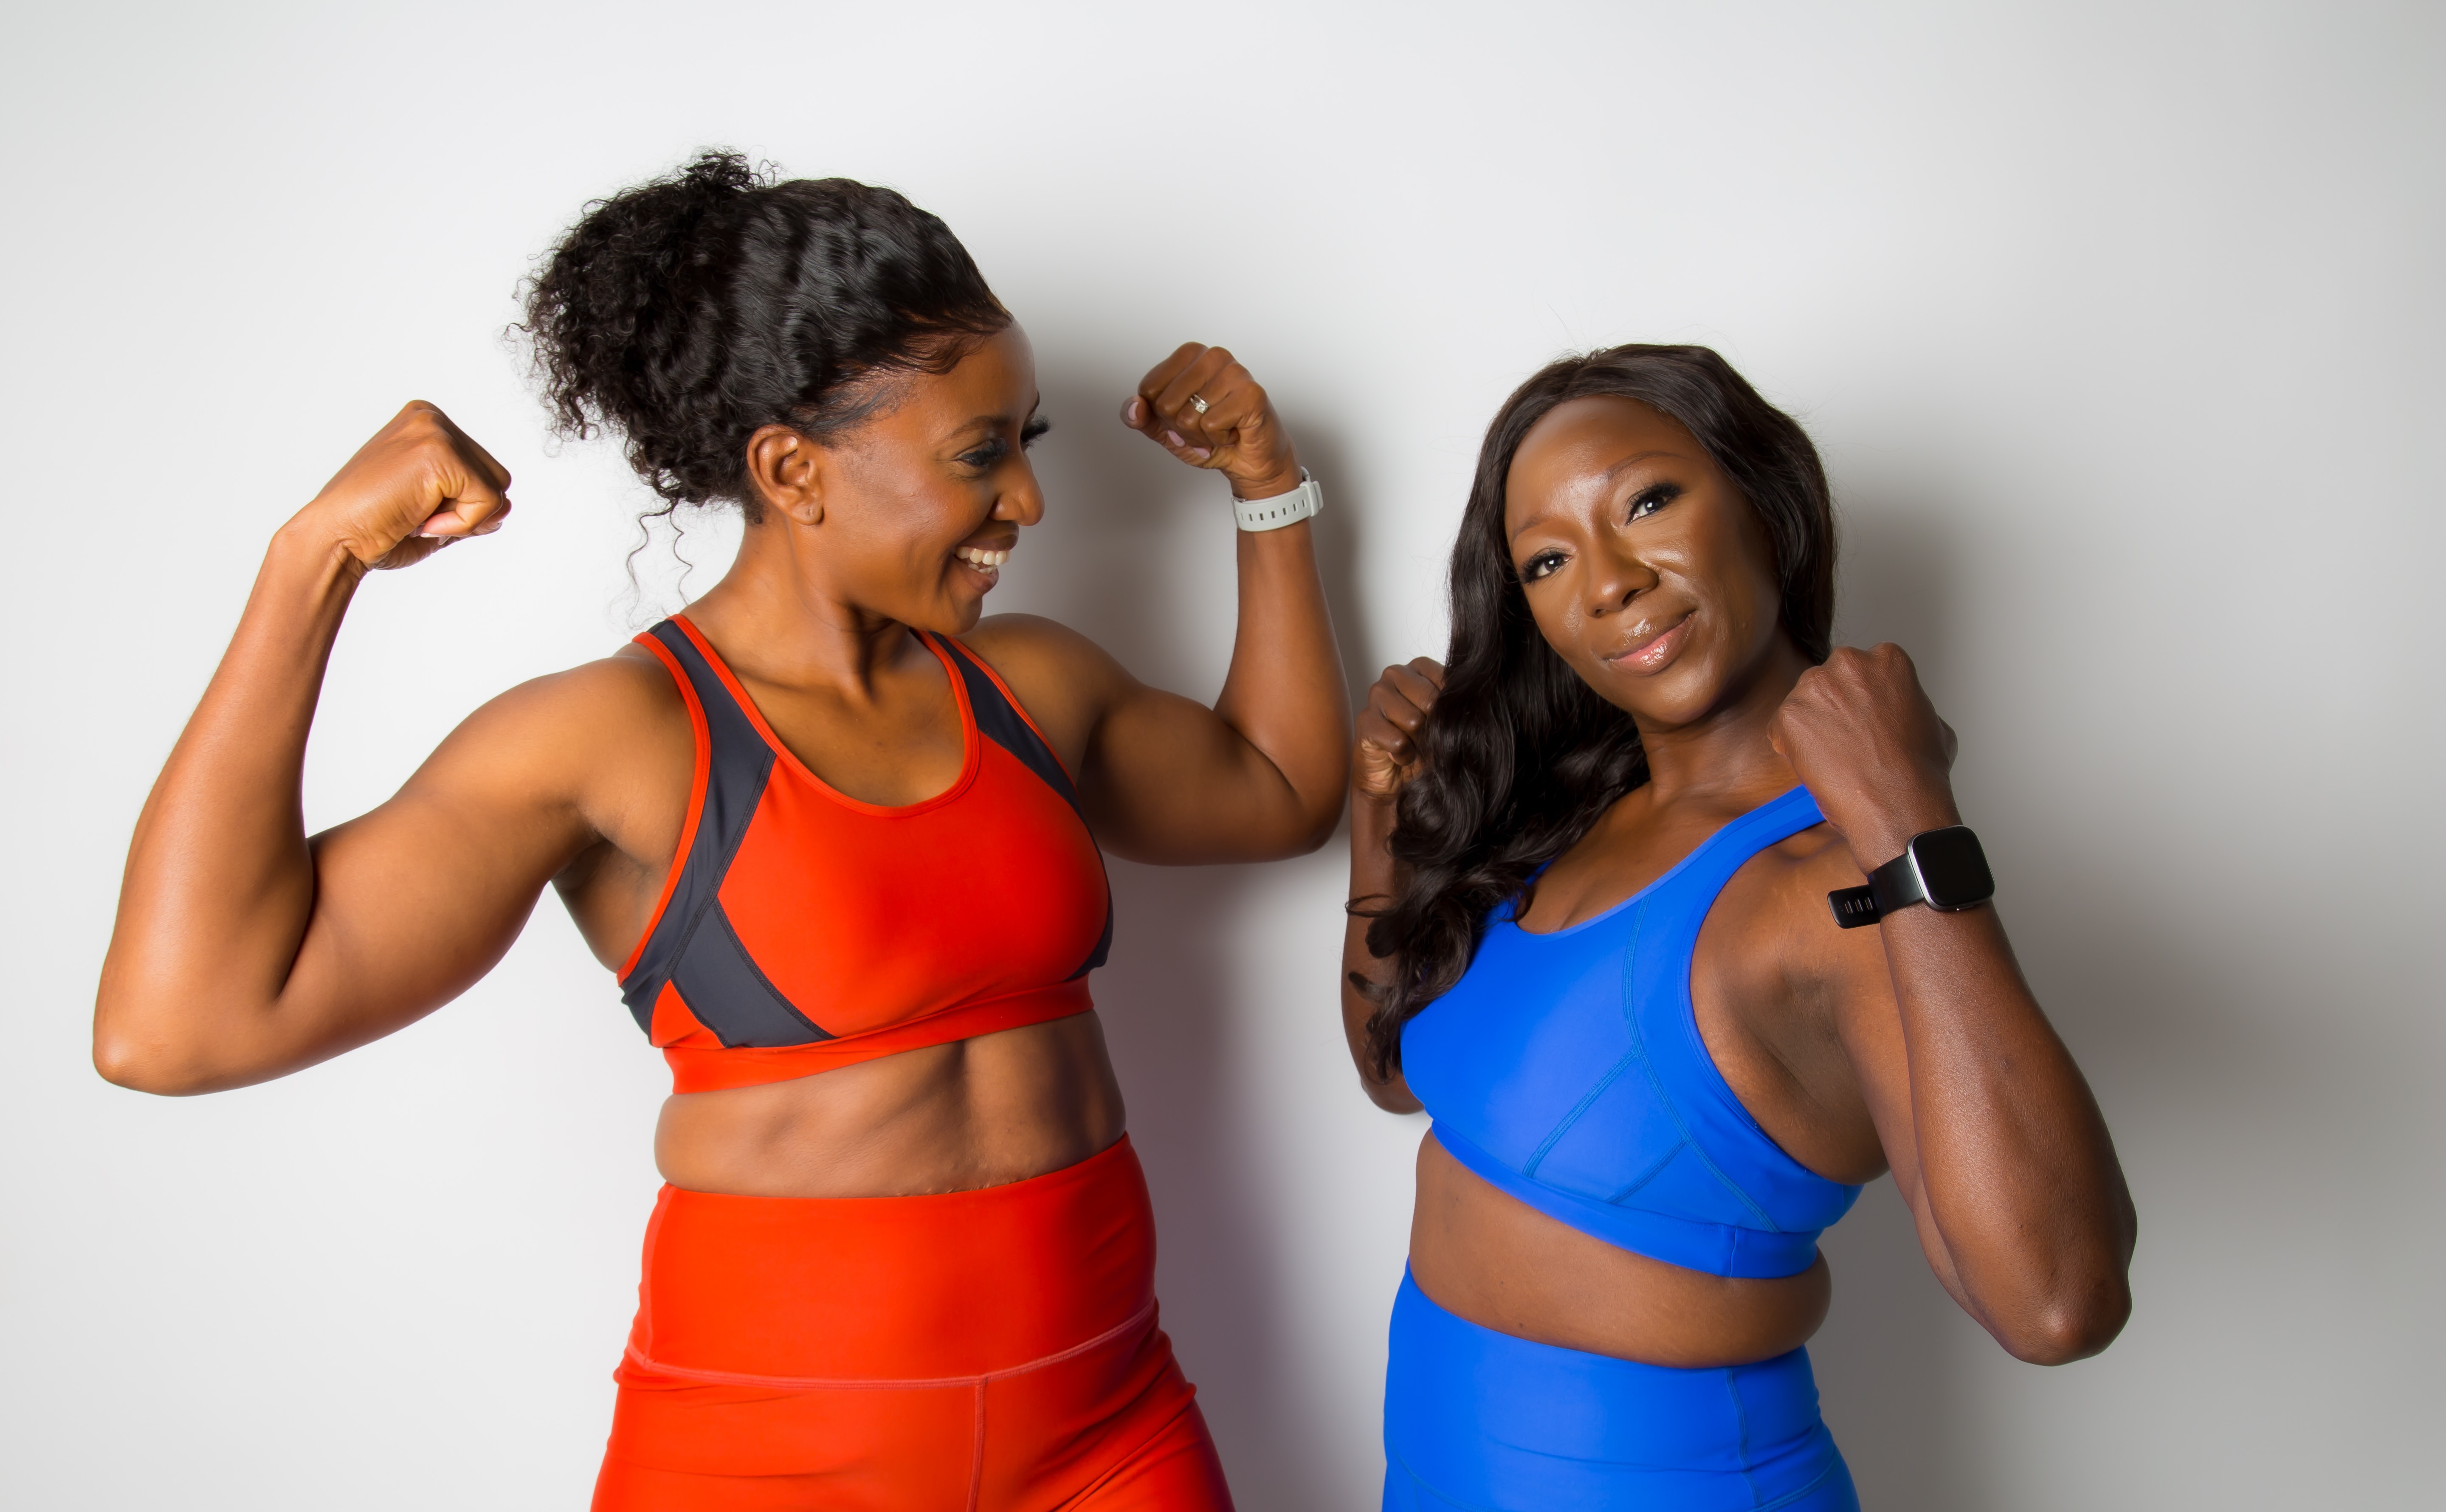 A good sports bra can improve your whole running technique - Scimex